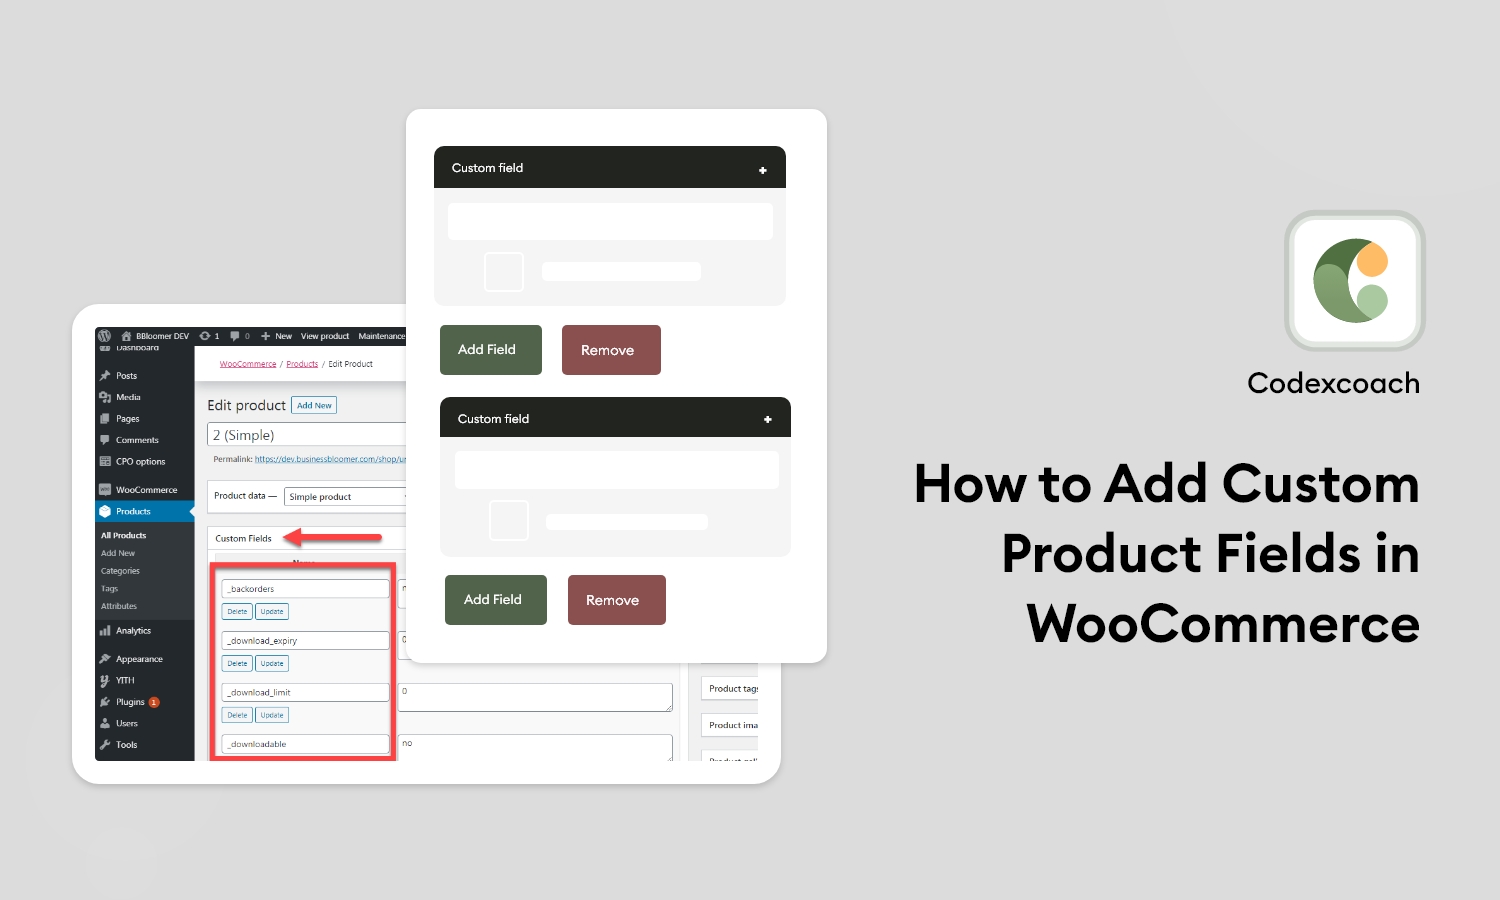 How to Add Custom Product Fields in WooCommerce